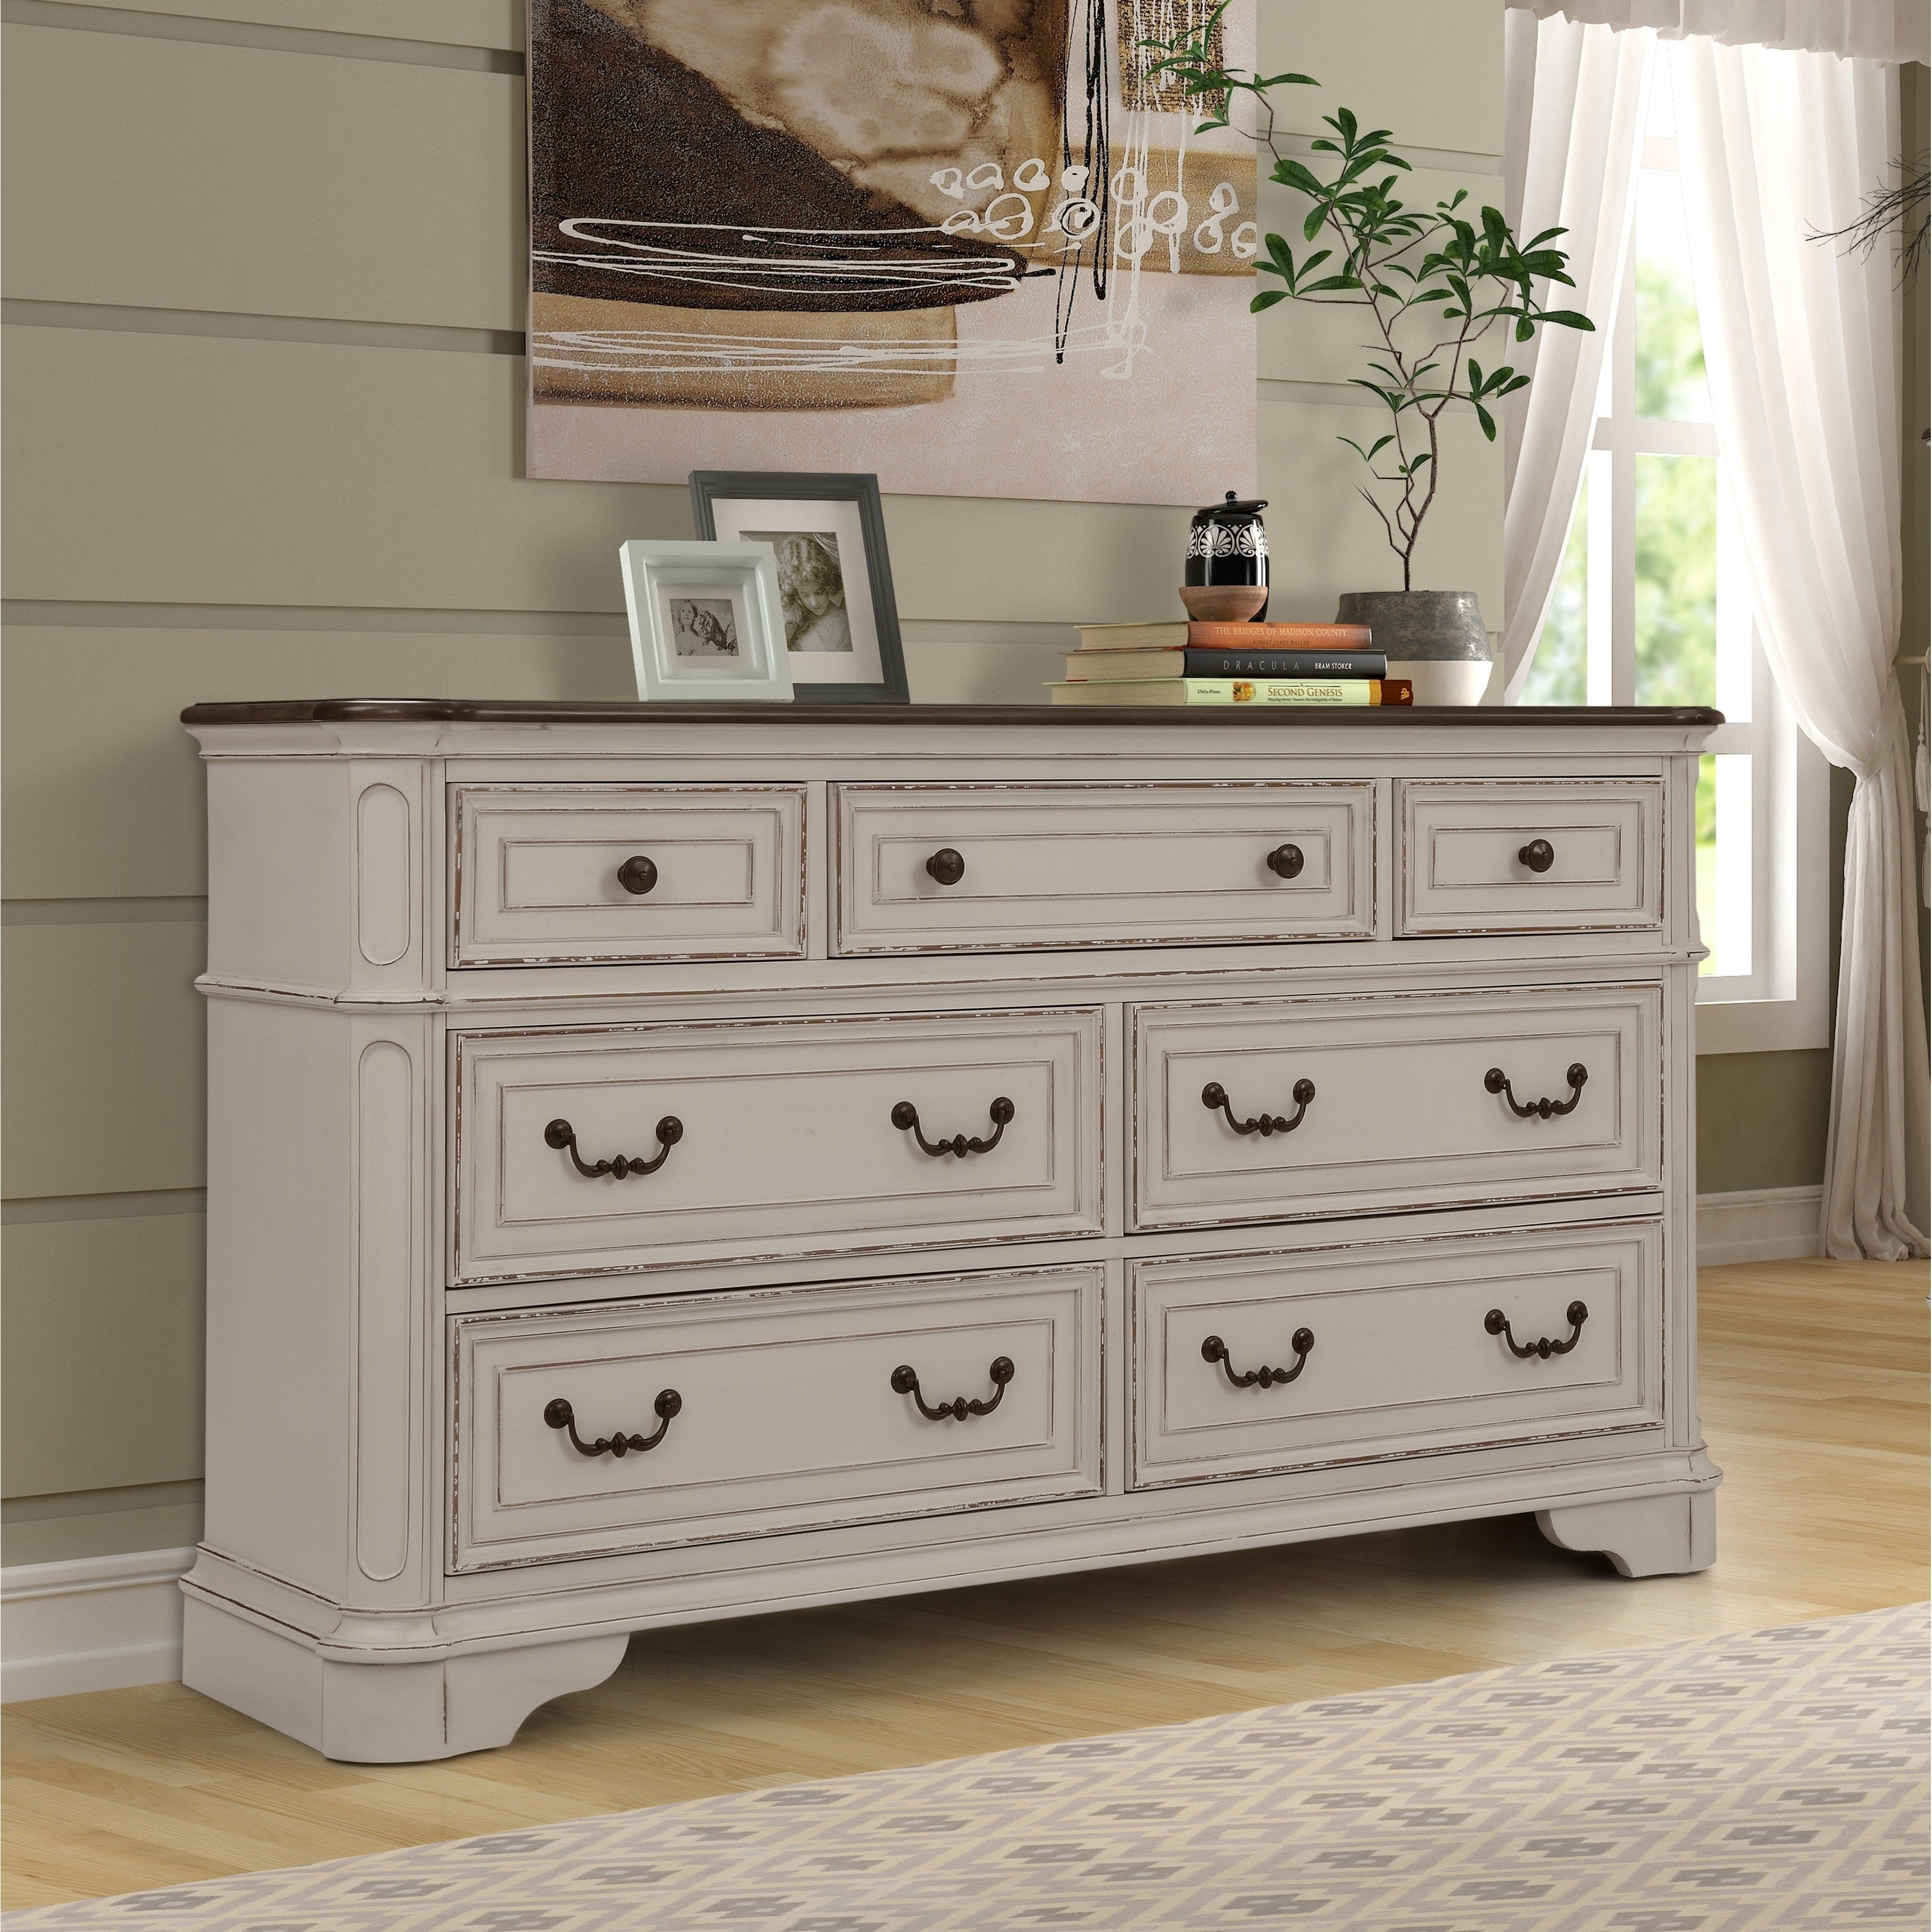 Rustic Pine Bedroom Furniture Lovely the Gray Barn Ariana Hills Antique White and Oak Wood Dresser